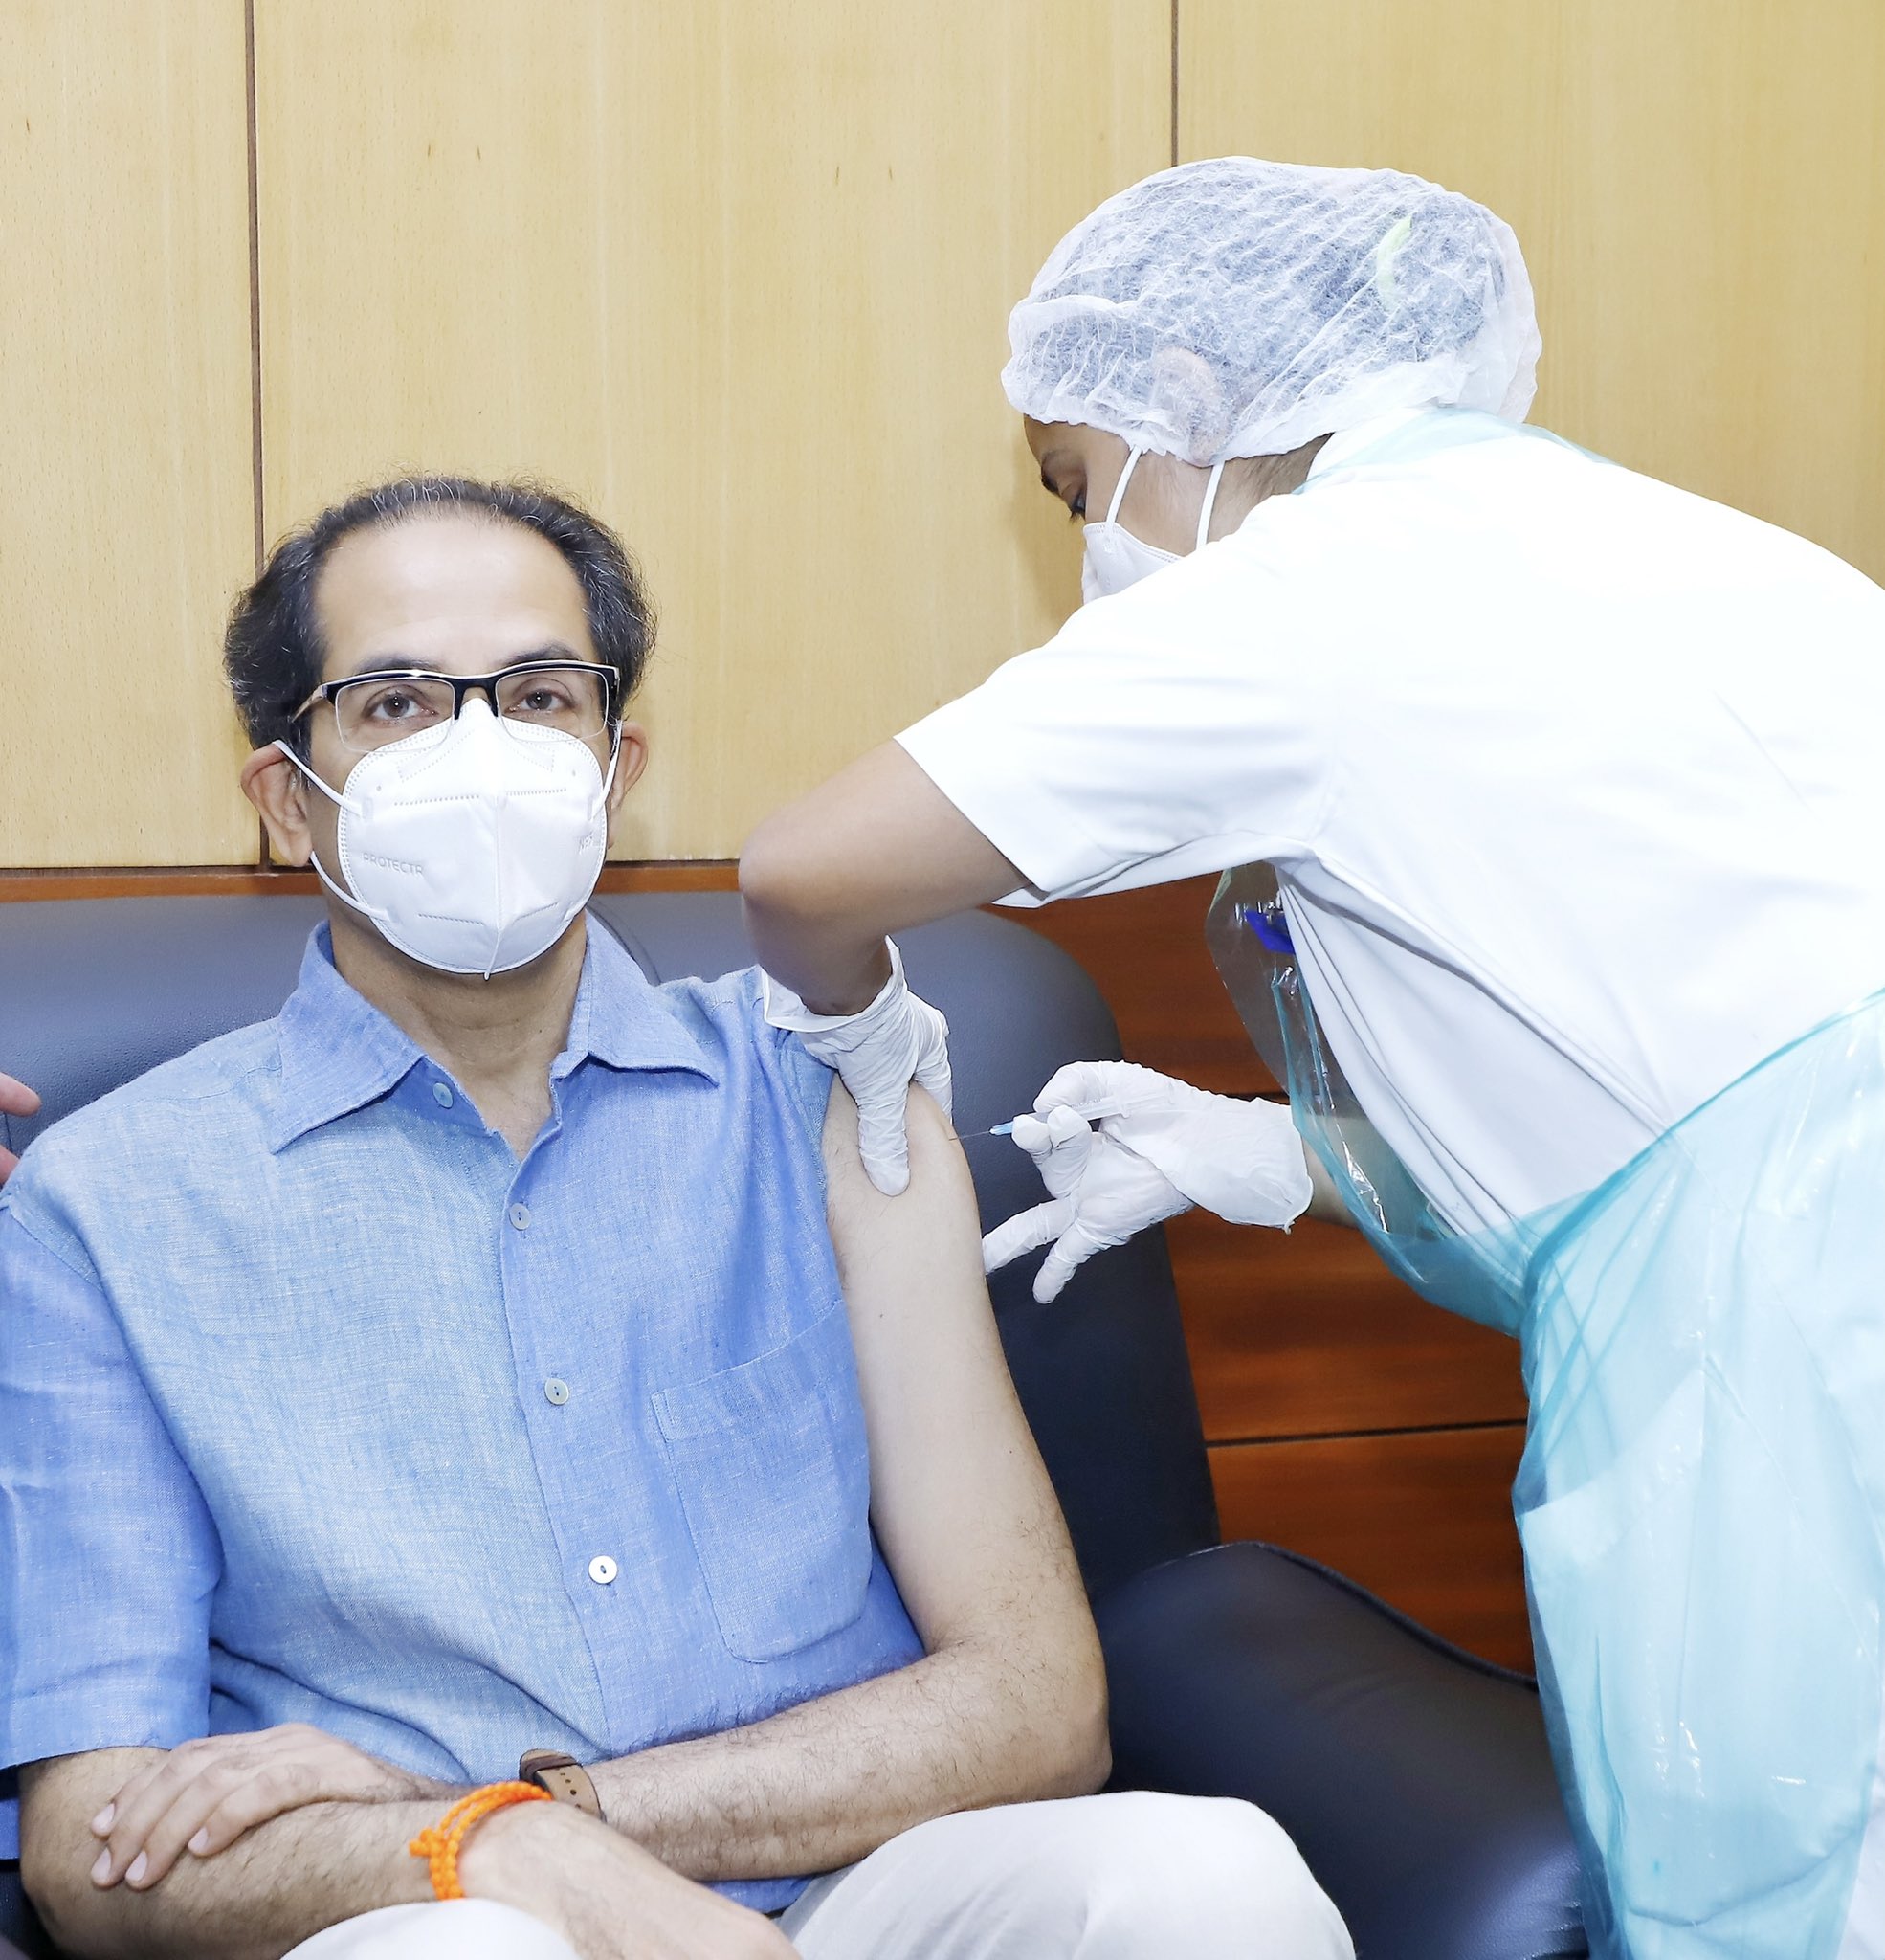 The Chief Minister Of Maharashtra Uddhav Thackeray Took The First Dose Of Covid 19 Vaccine